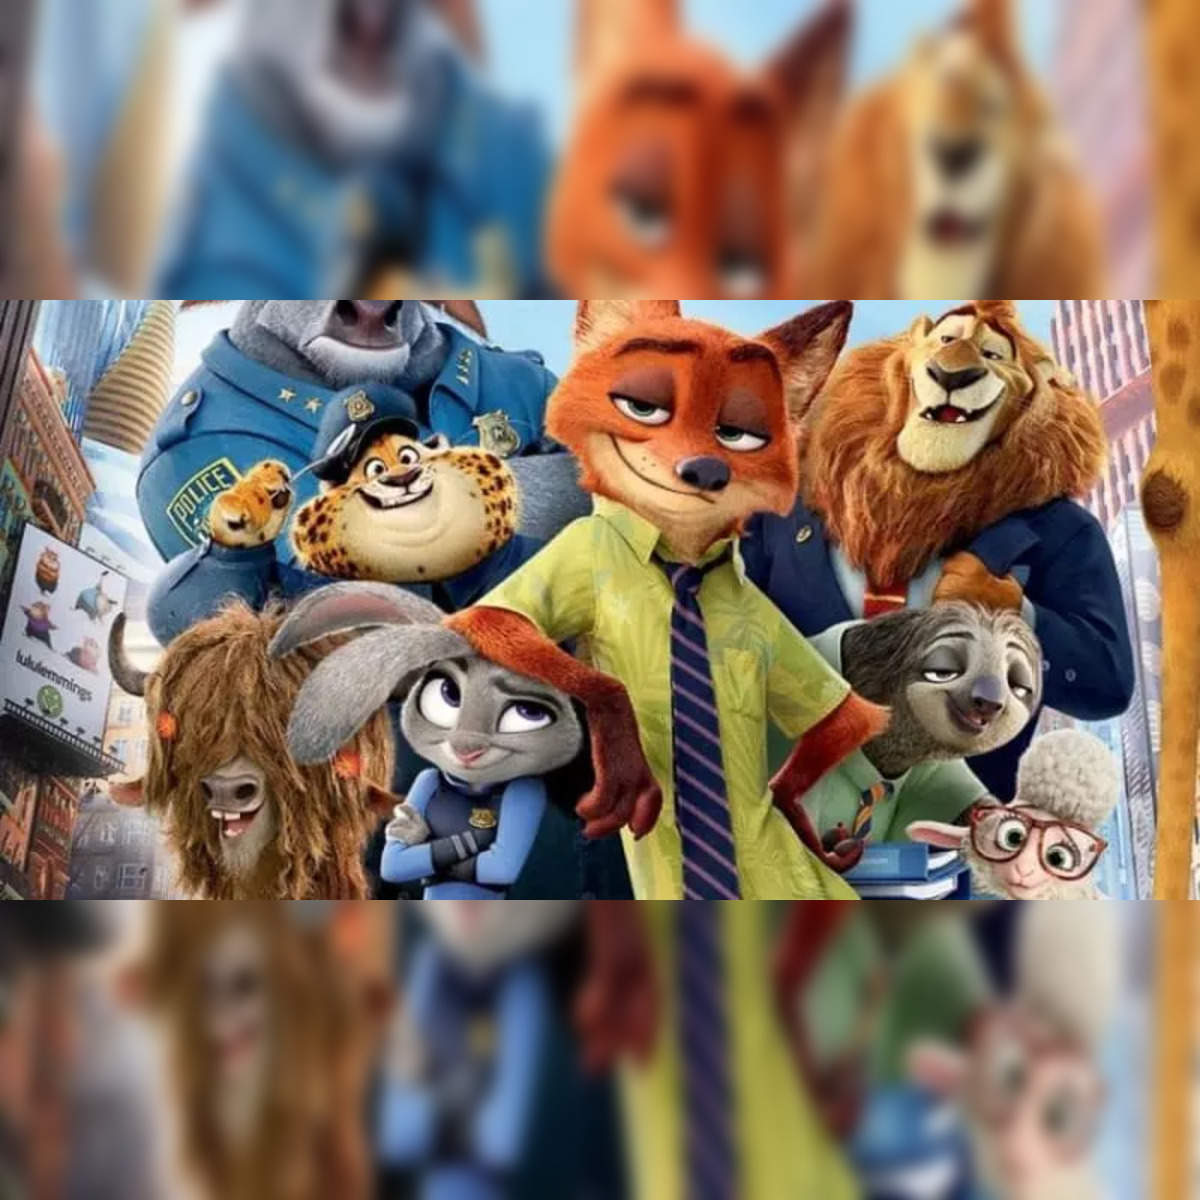 Zootopia 2 Now Moving Forward 7 Years After Blockbuster Original - IMDb